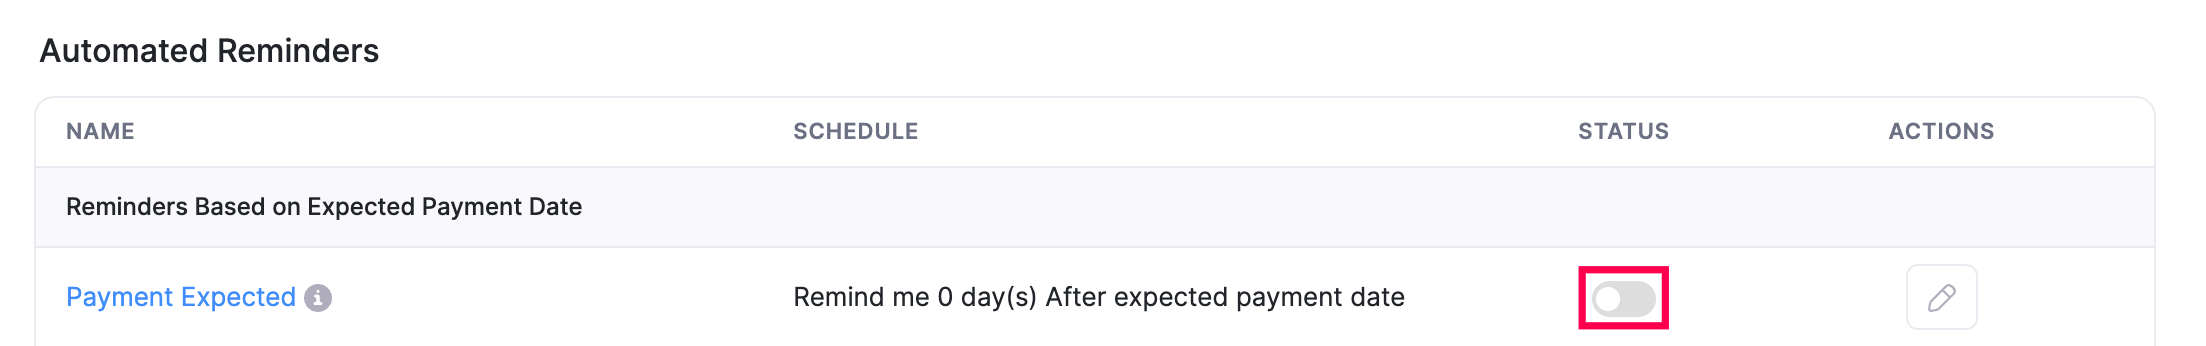 Turn ON Expected Payment Date Reminder